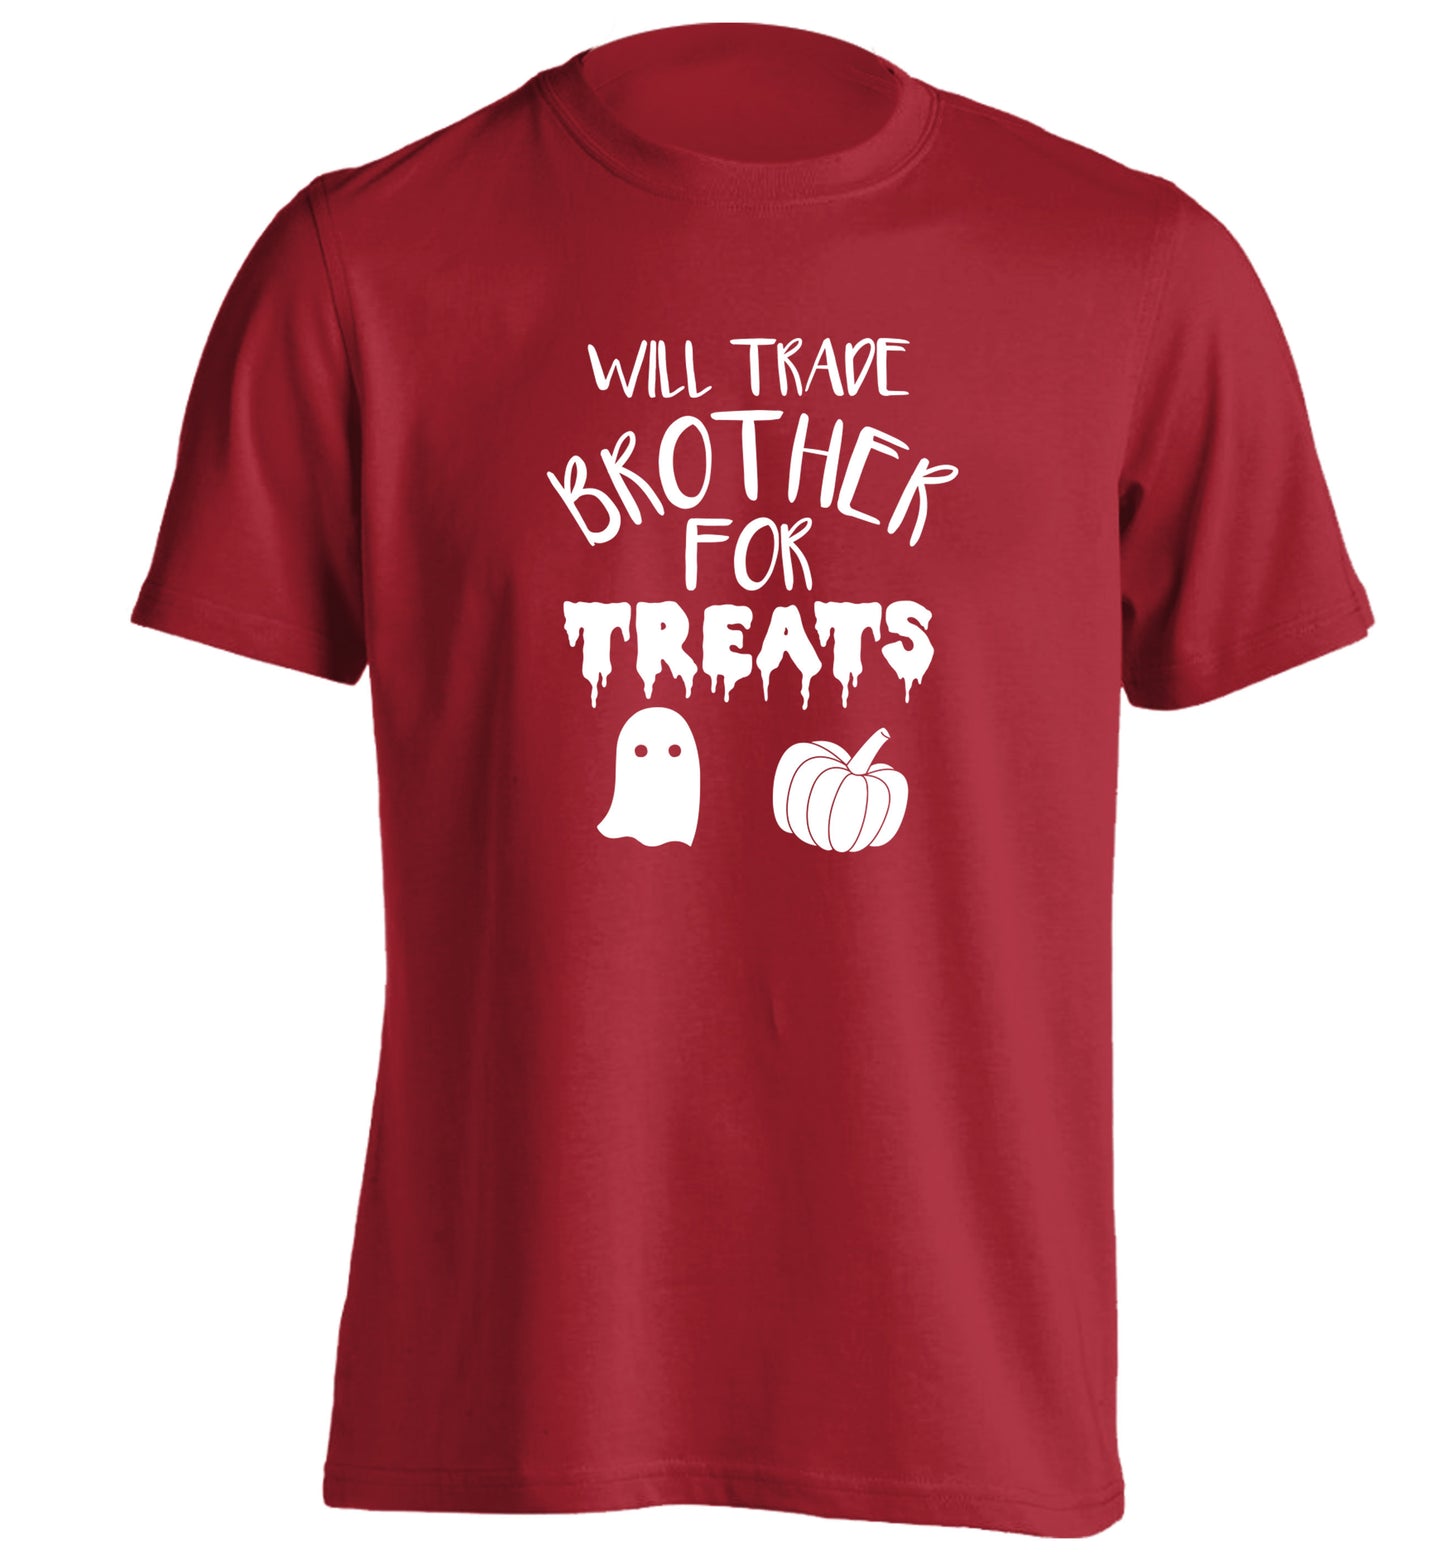 Will trade brother for treats adults unisex red Tshirt 2XL